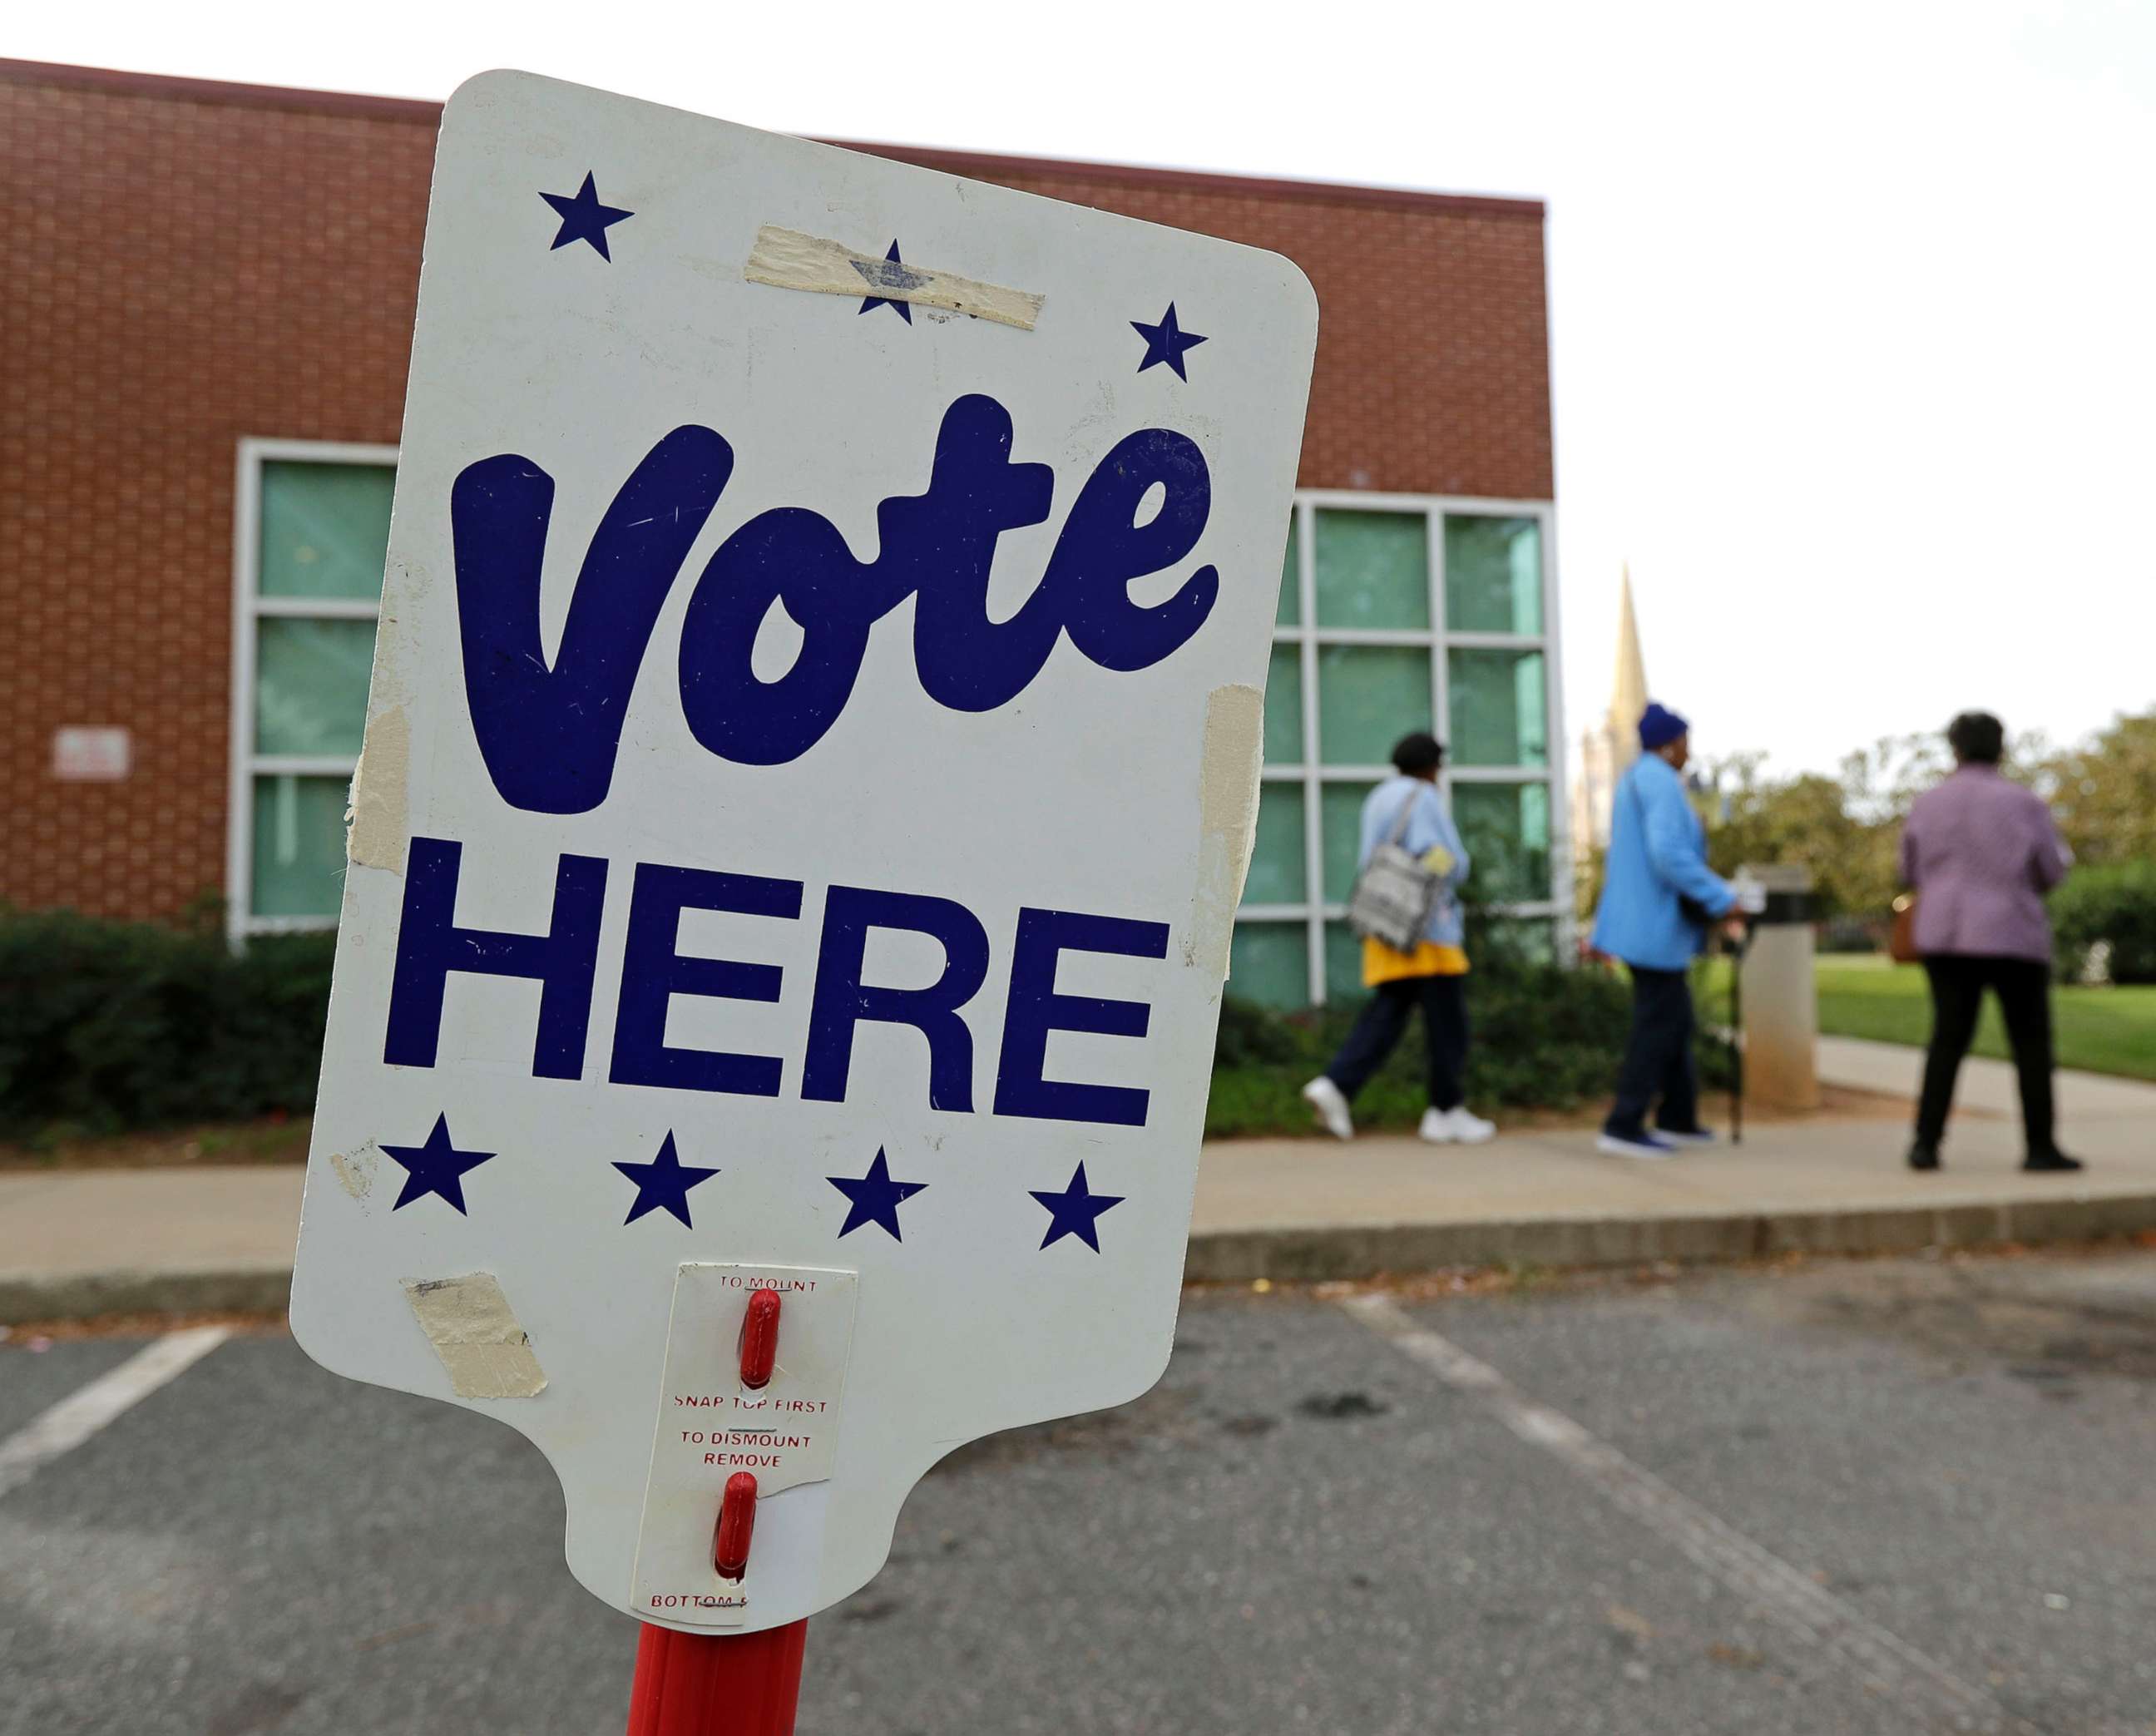 PHOTO: People arrive for early voting at a polling place in Charlotte, N.C., Oct. 23, 2018.